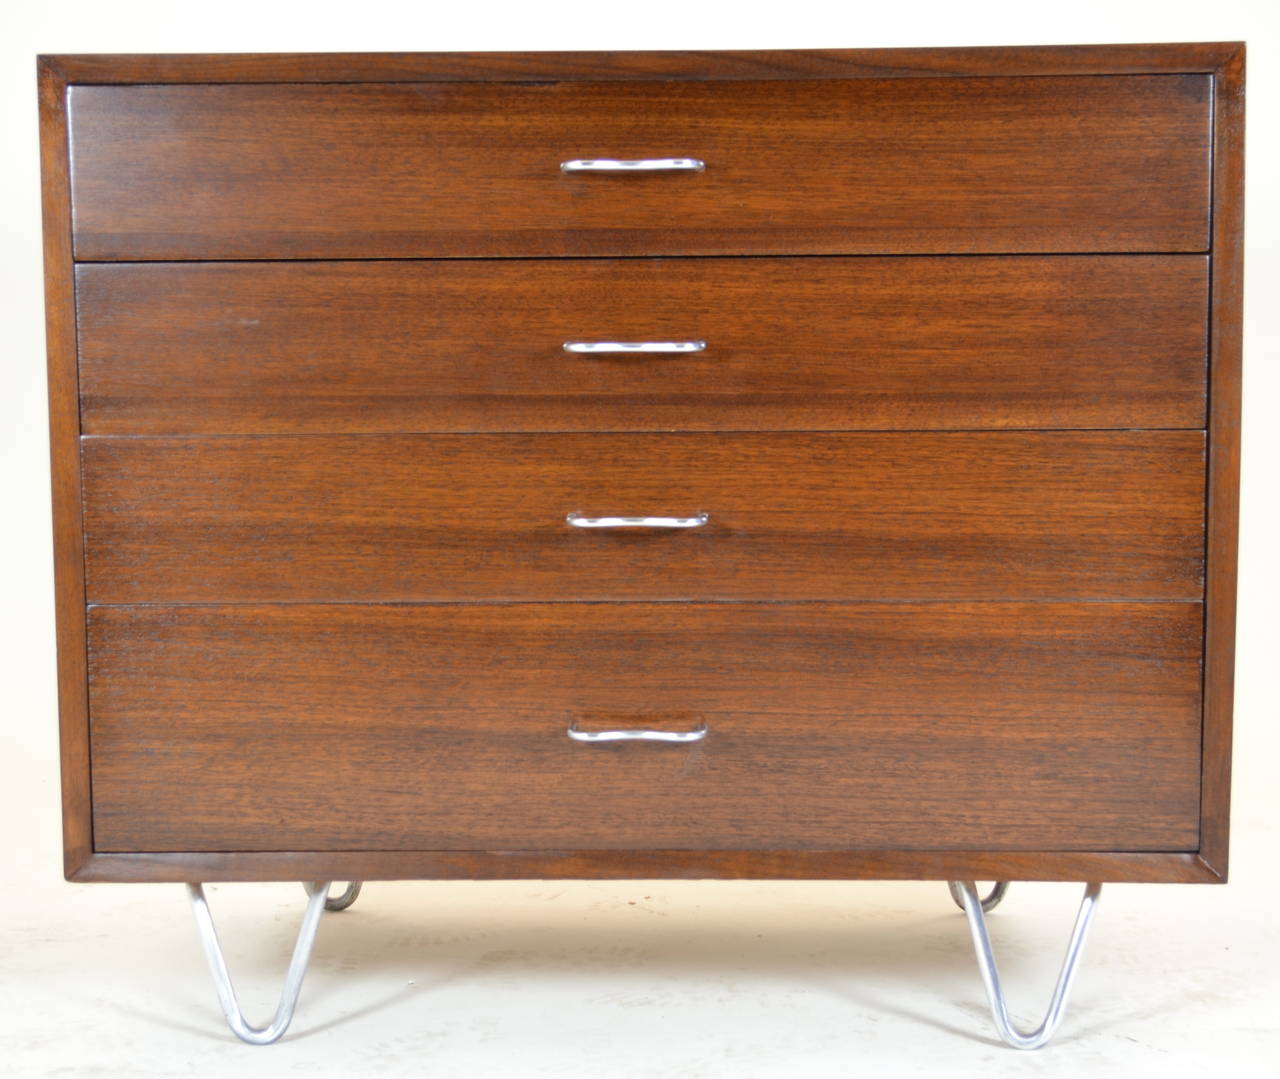 Beautiful walnut chest newly refinished with original hairpin legs and "M" form handles in brushed steel. Excellent condition. Herman Miller label with printed George Nelson signature in top drawer.